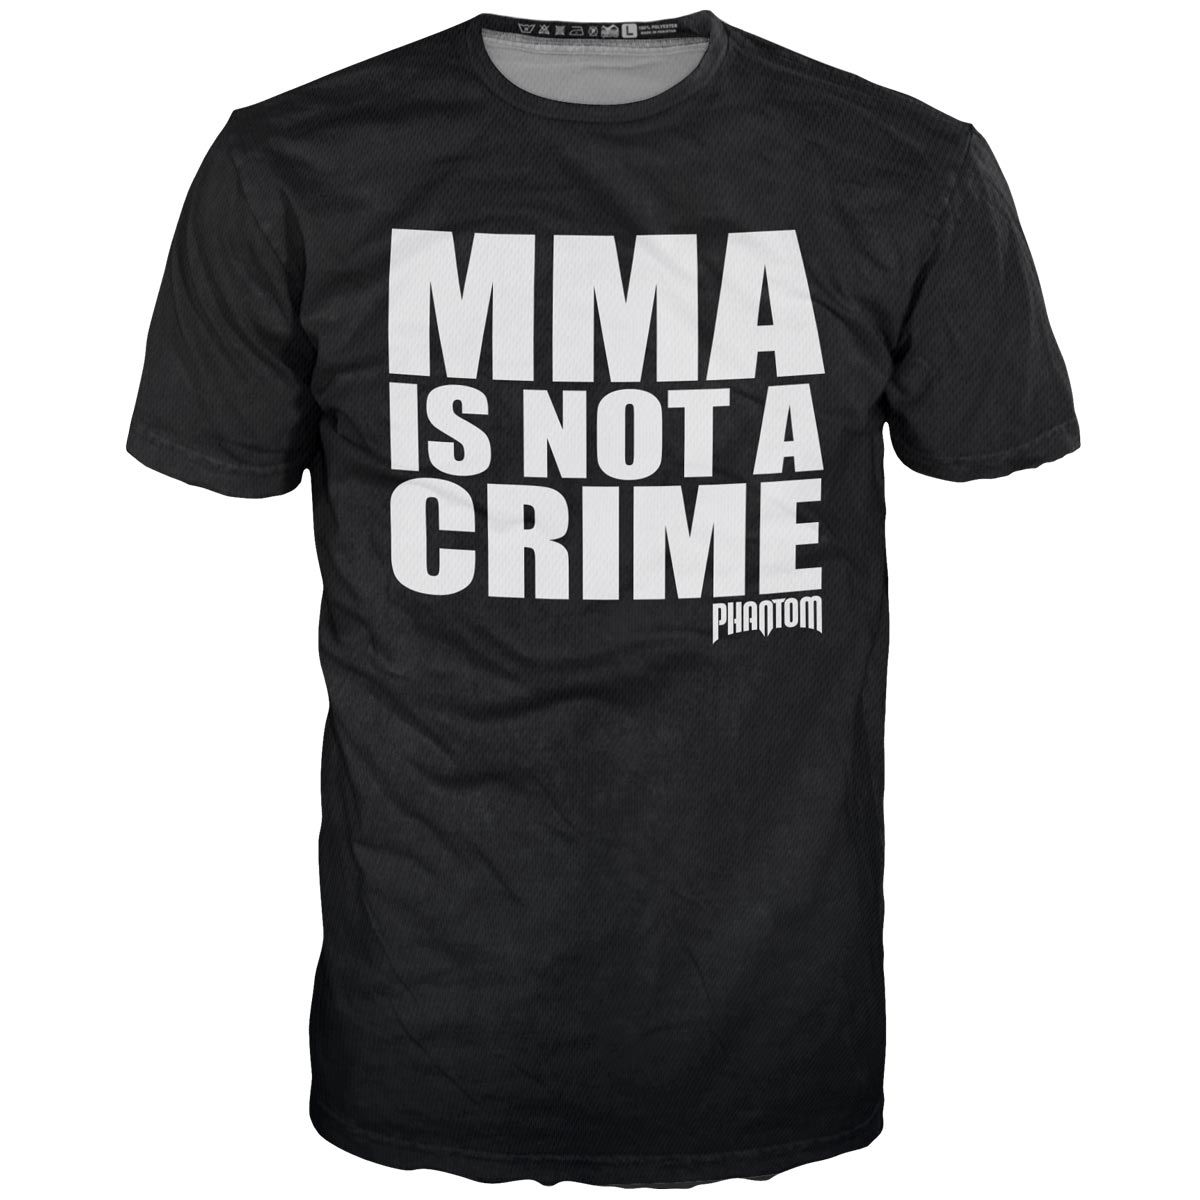 Phantom classic for all martial arts fans. MMA IS NOT A CRIME. For everyone who wants to promote MMA sport in Germany. Ideal for your fight training.